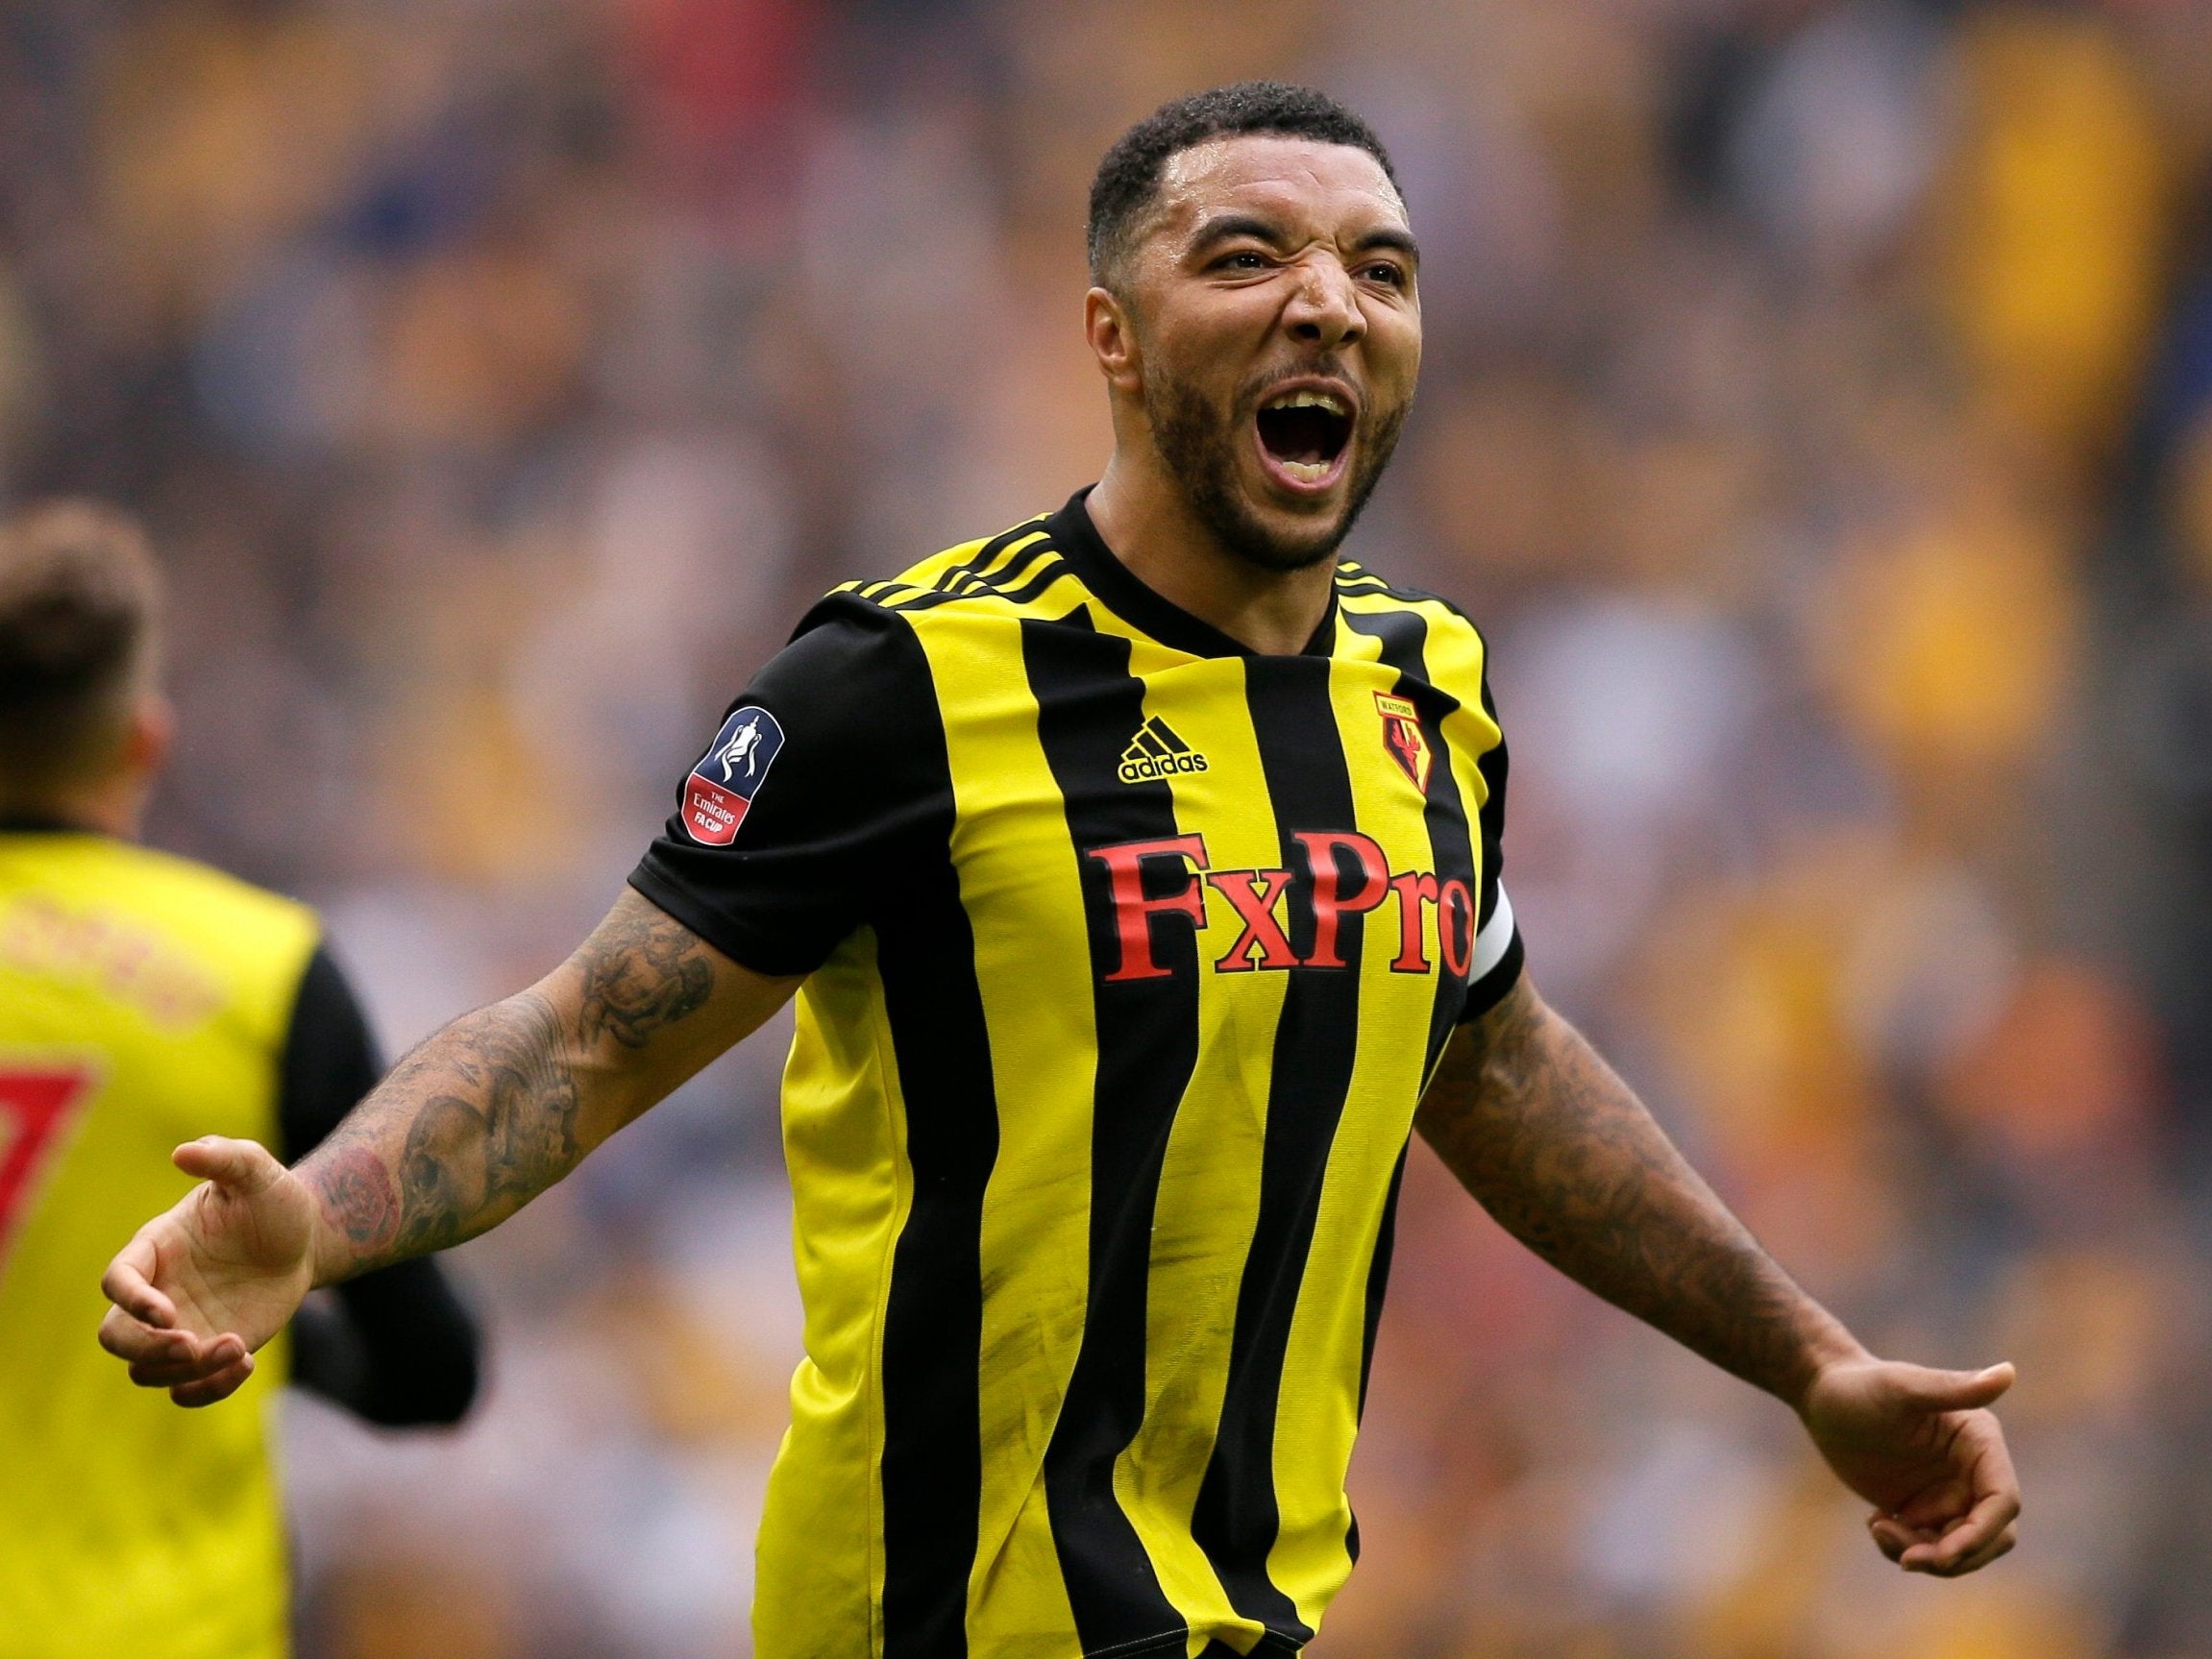 Watford captain Troy Deeney received racist abuse on Instagram after Sunday's FA Cup victory over Wolves